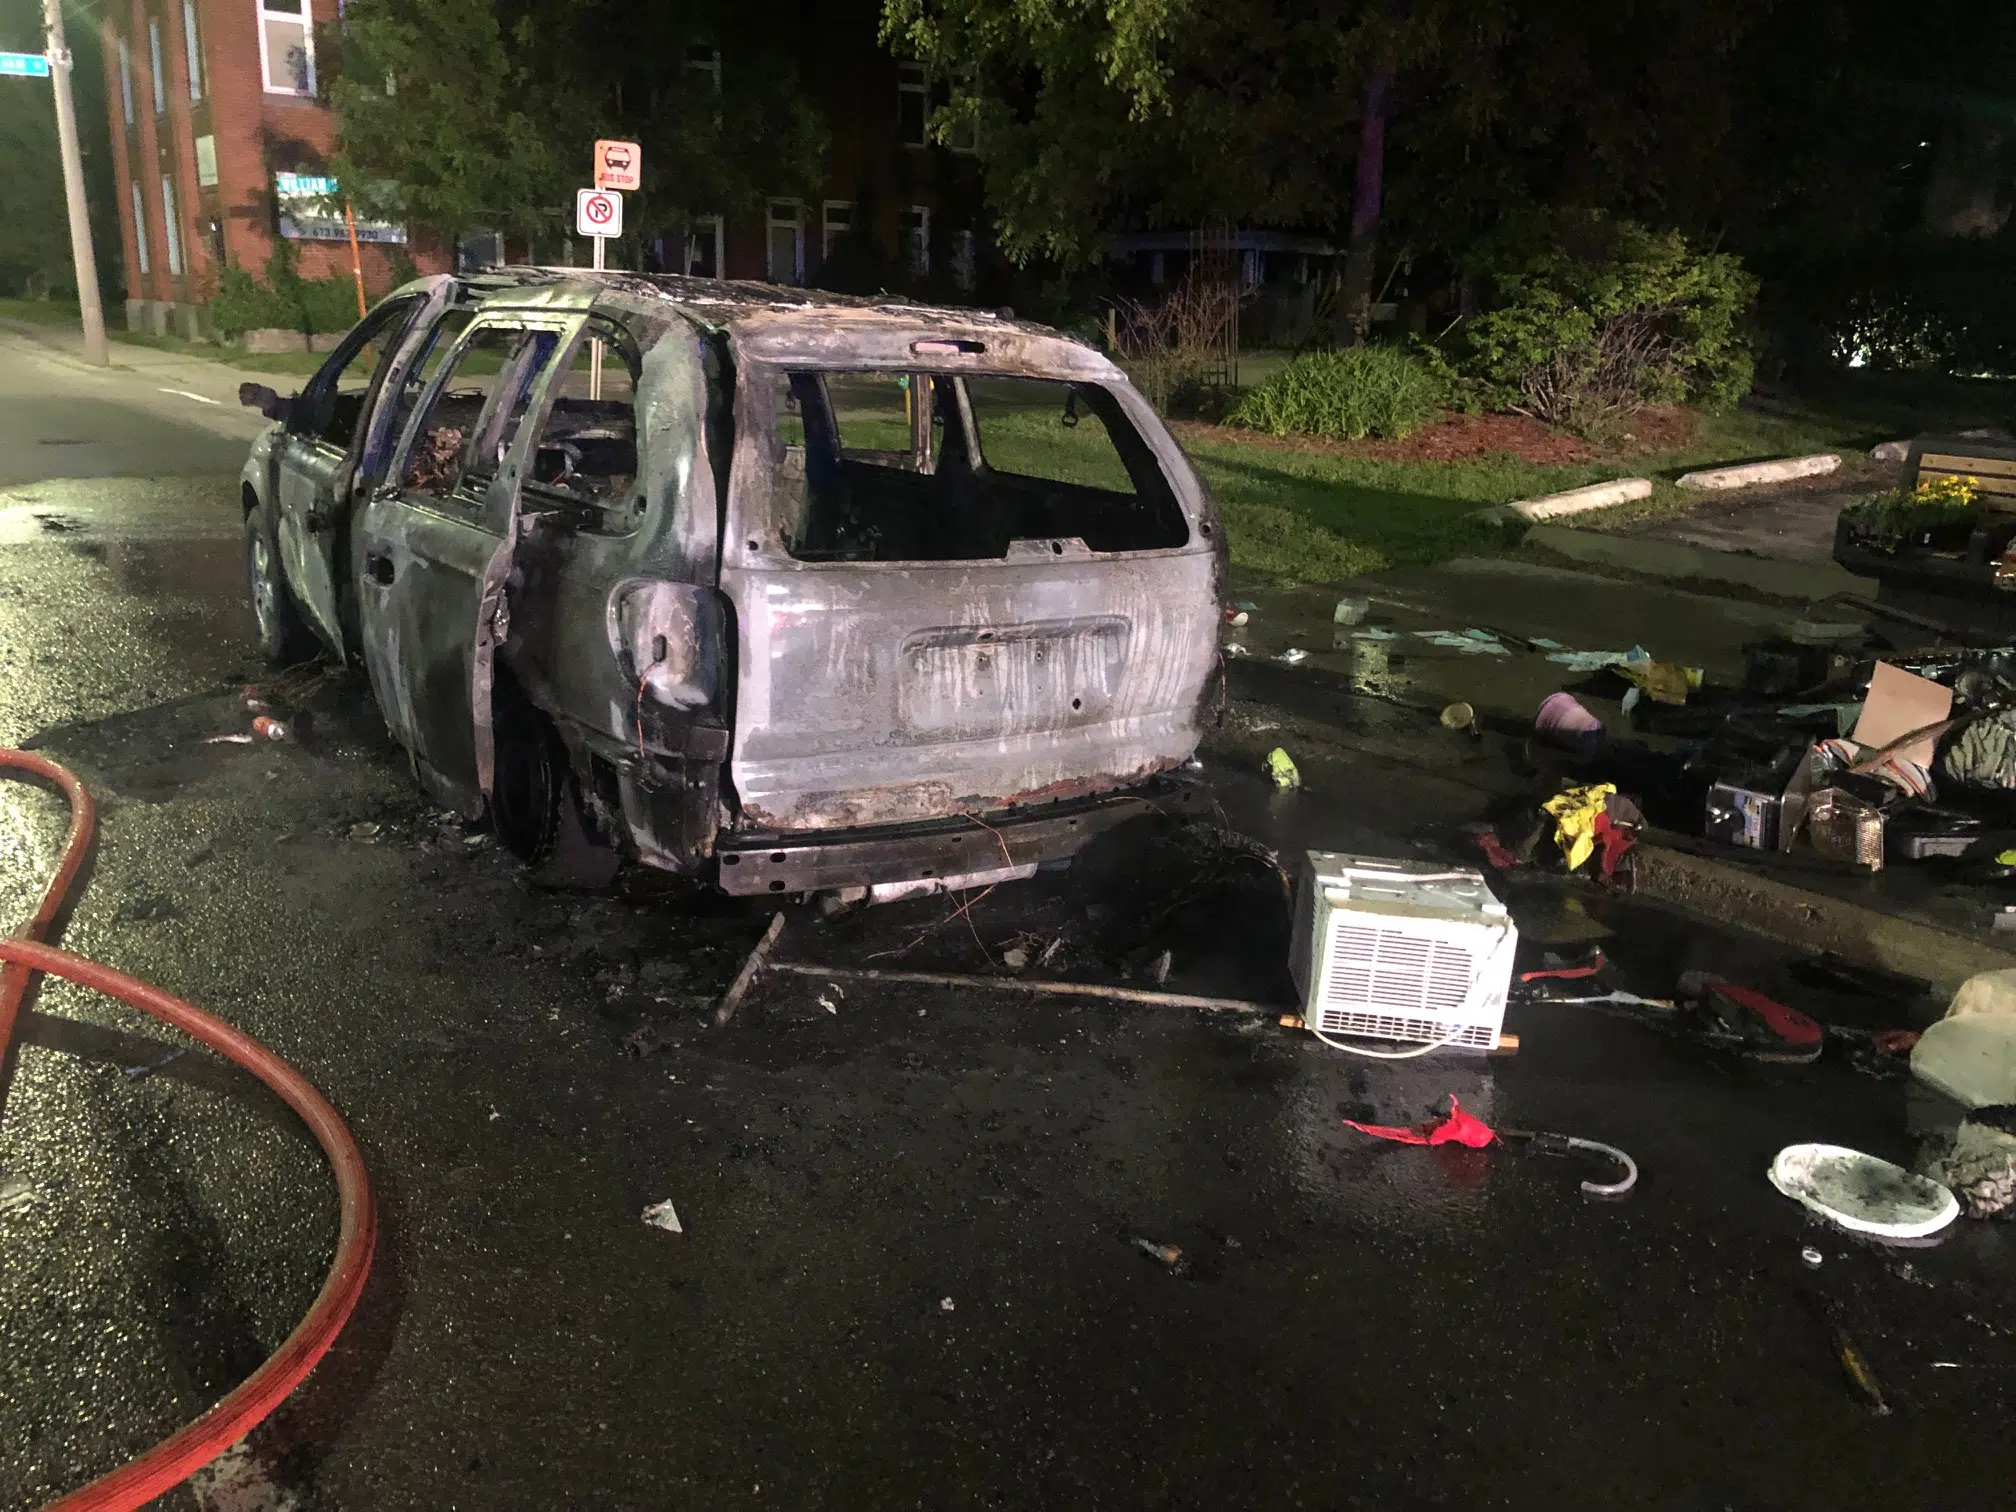 Van destroyed by fire